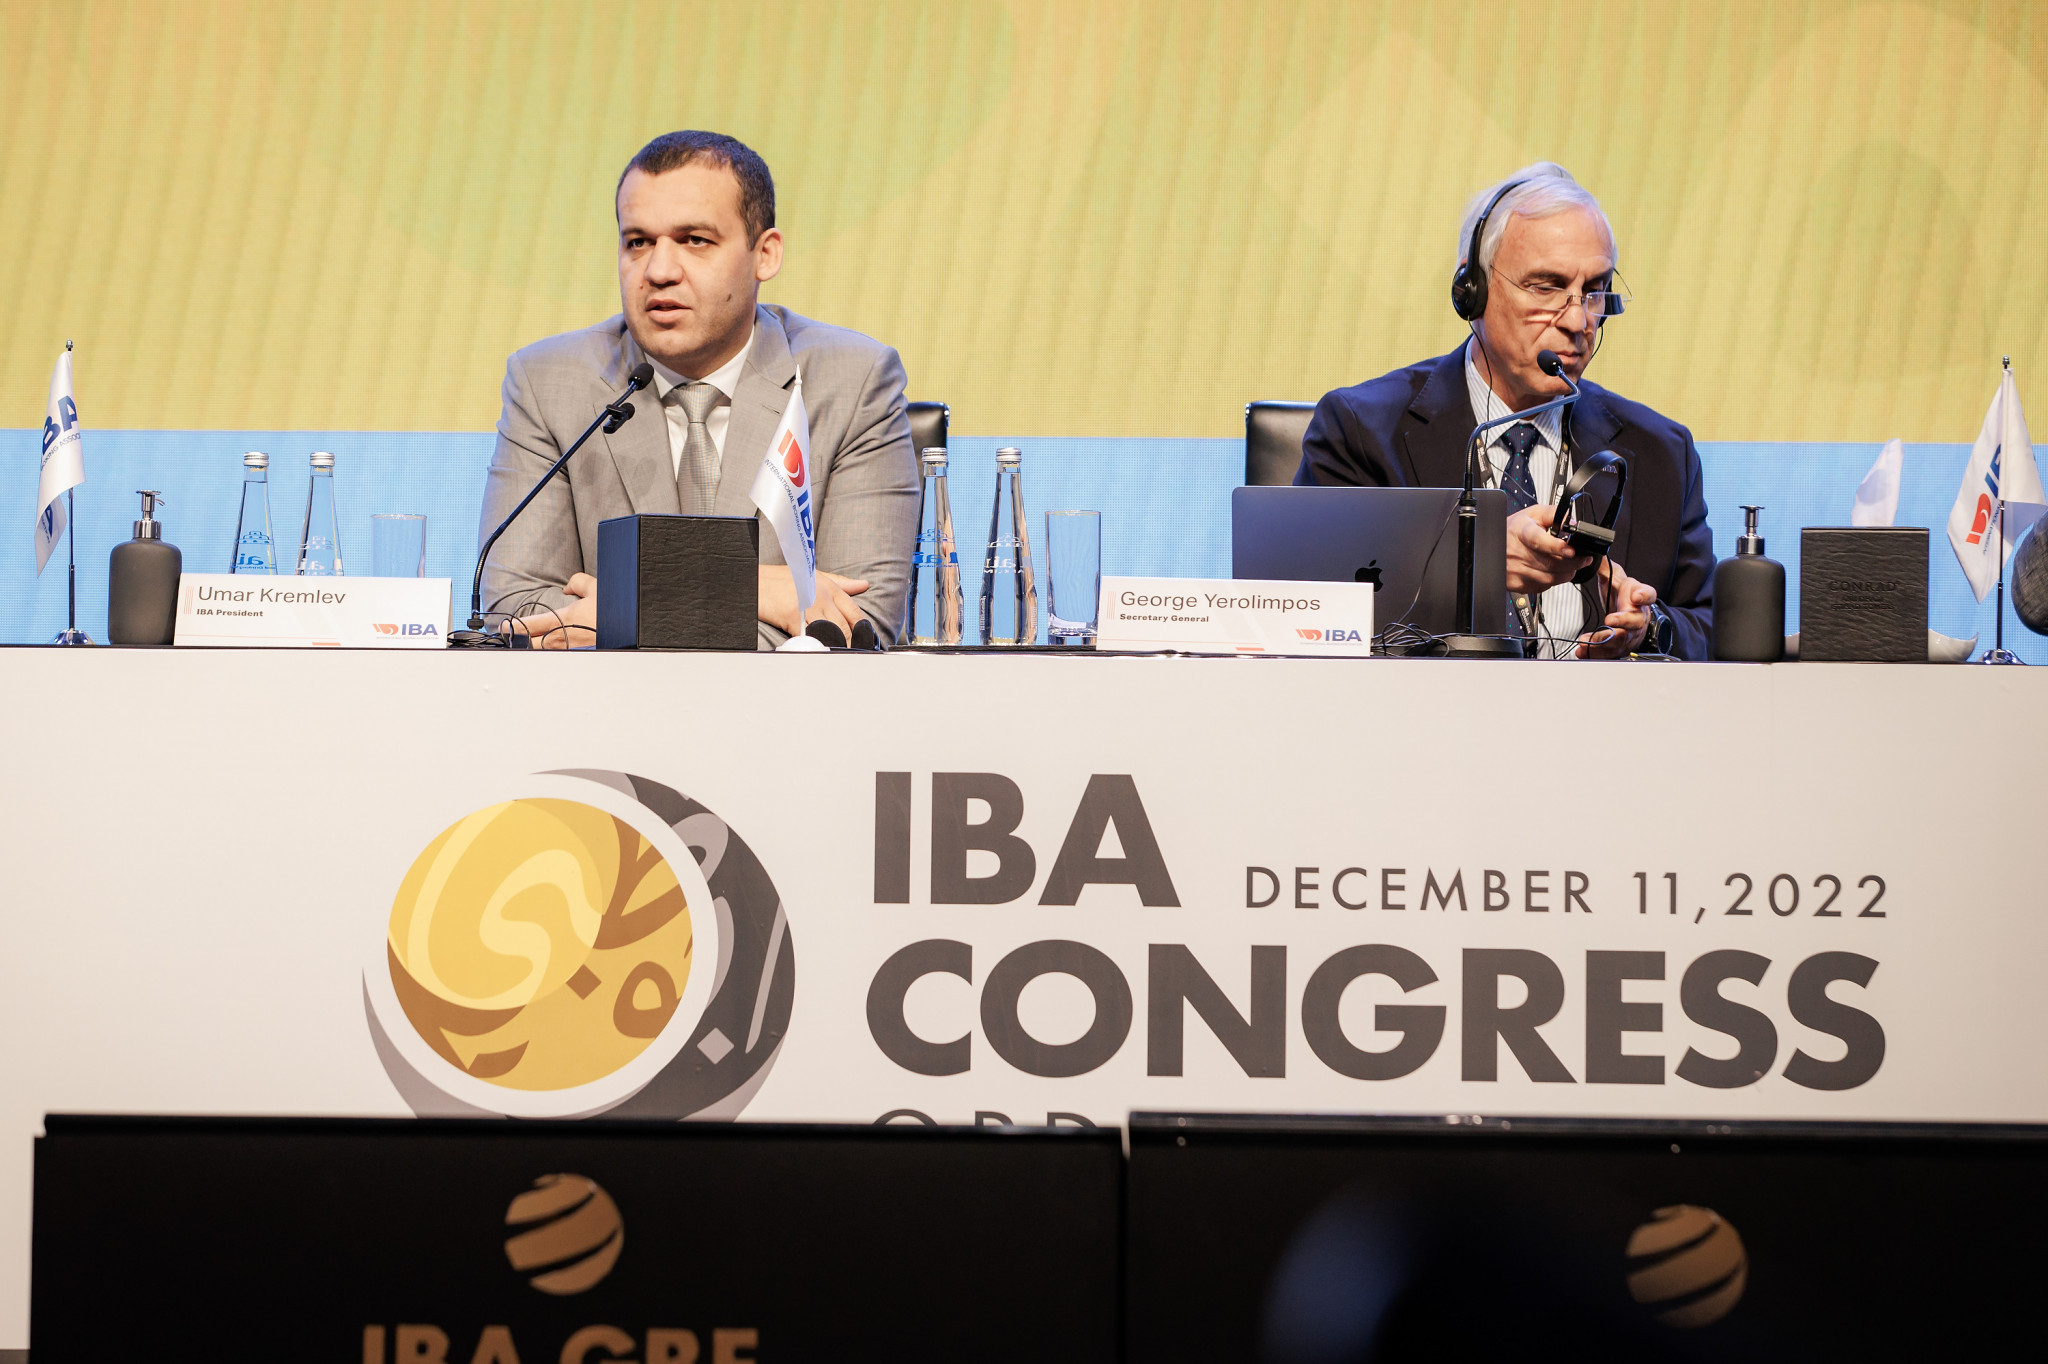 IBA lifts Boxing Federation of Ukraine suspension and recognises Shevchenko leadership